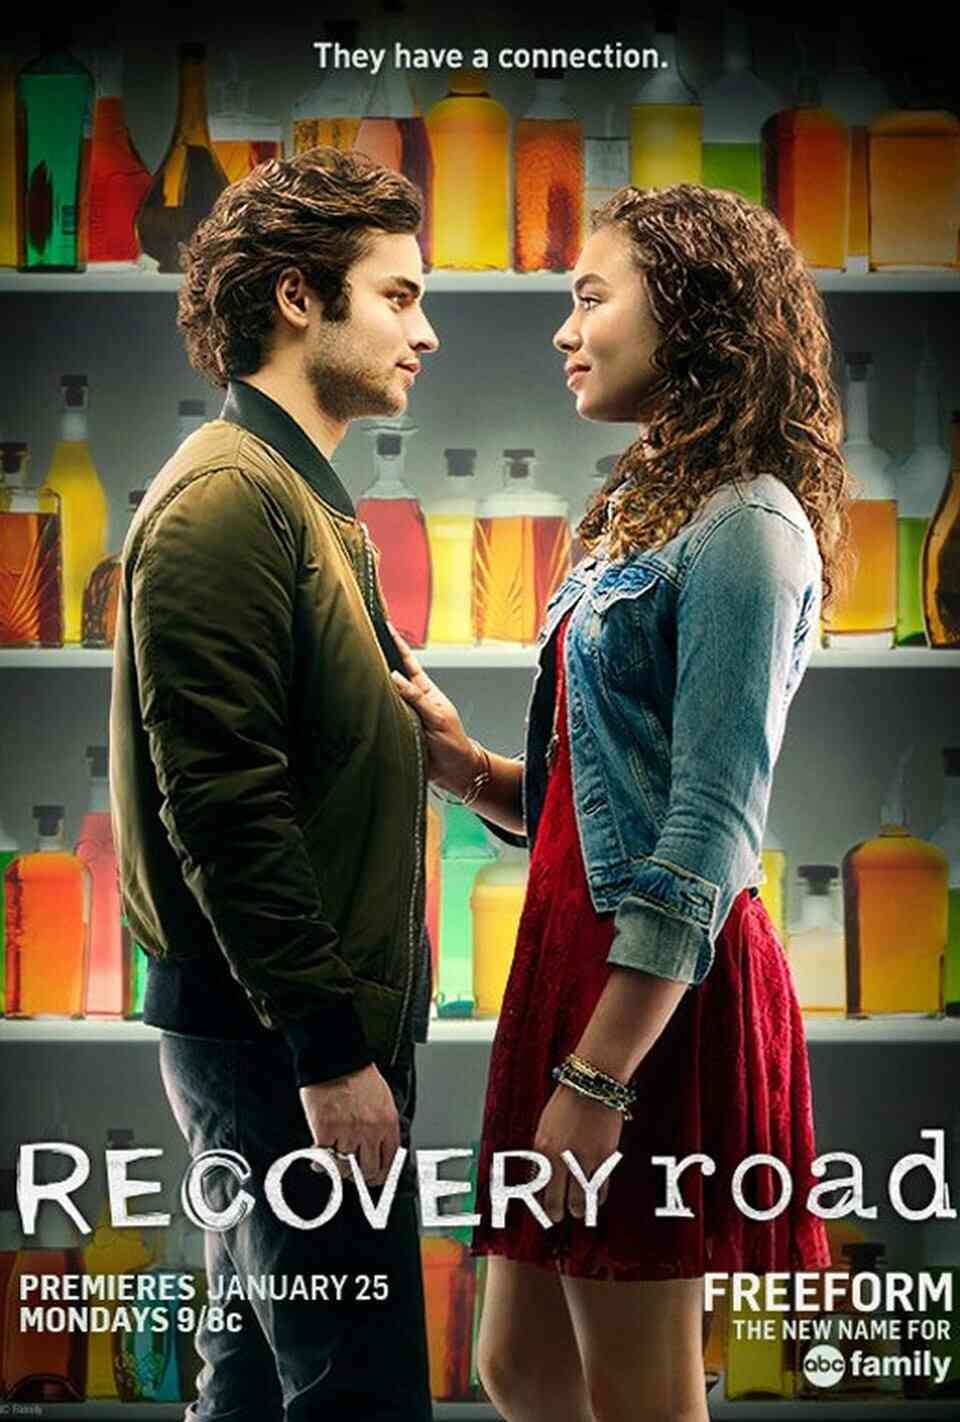 Read Recovery Road screenplay.